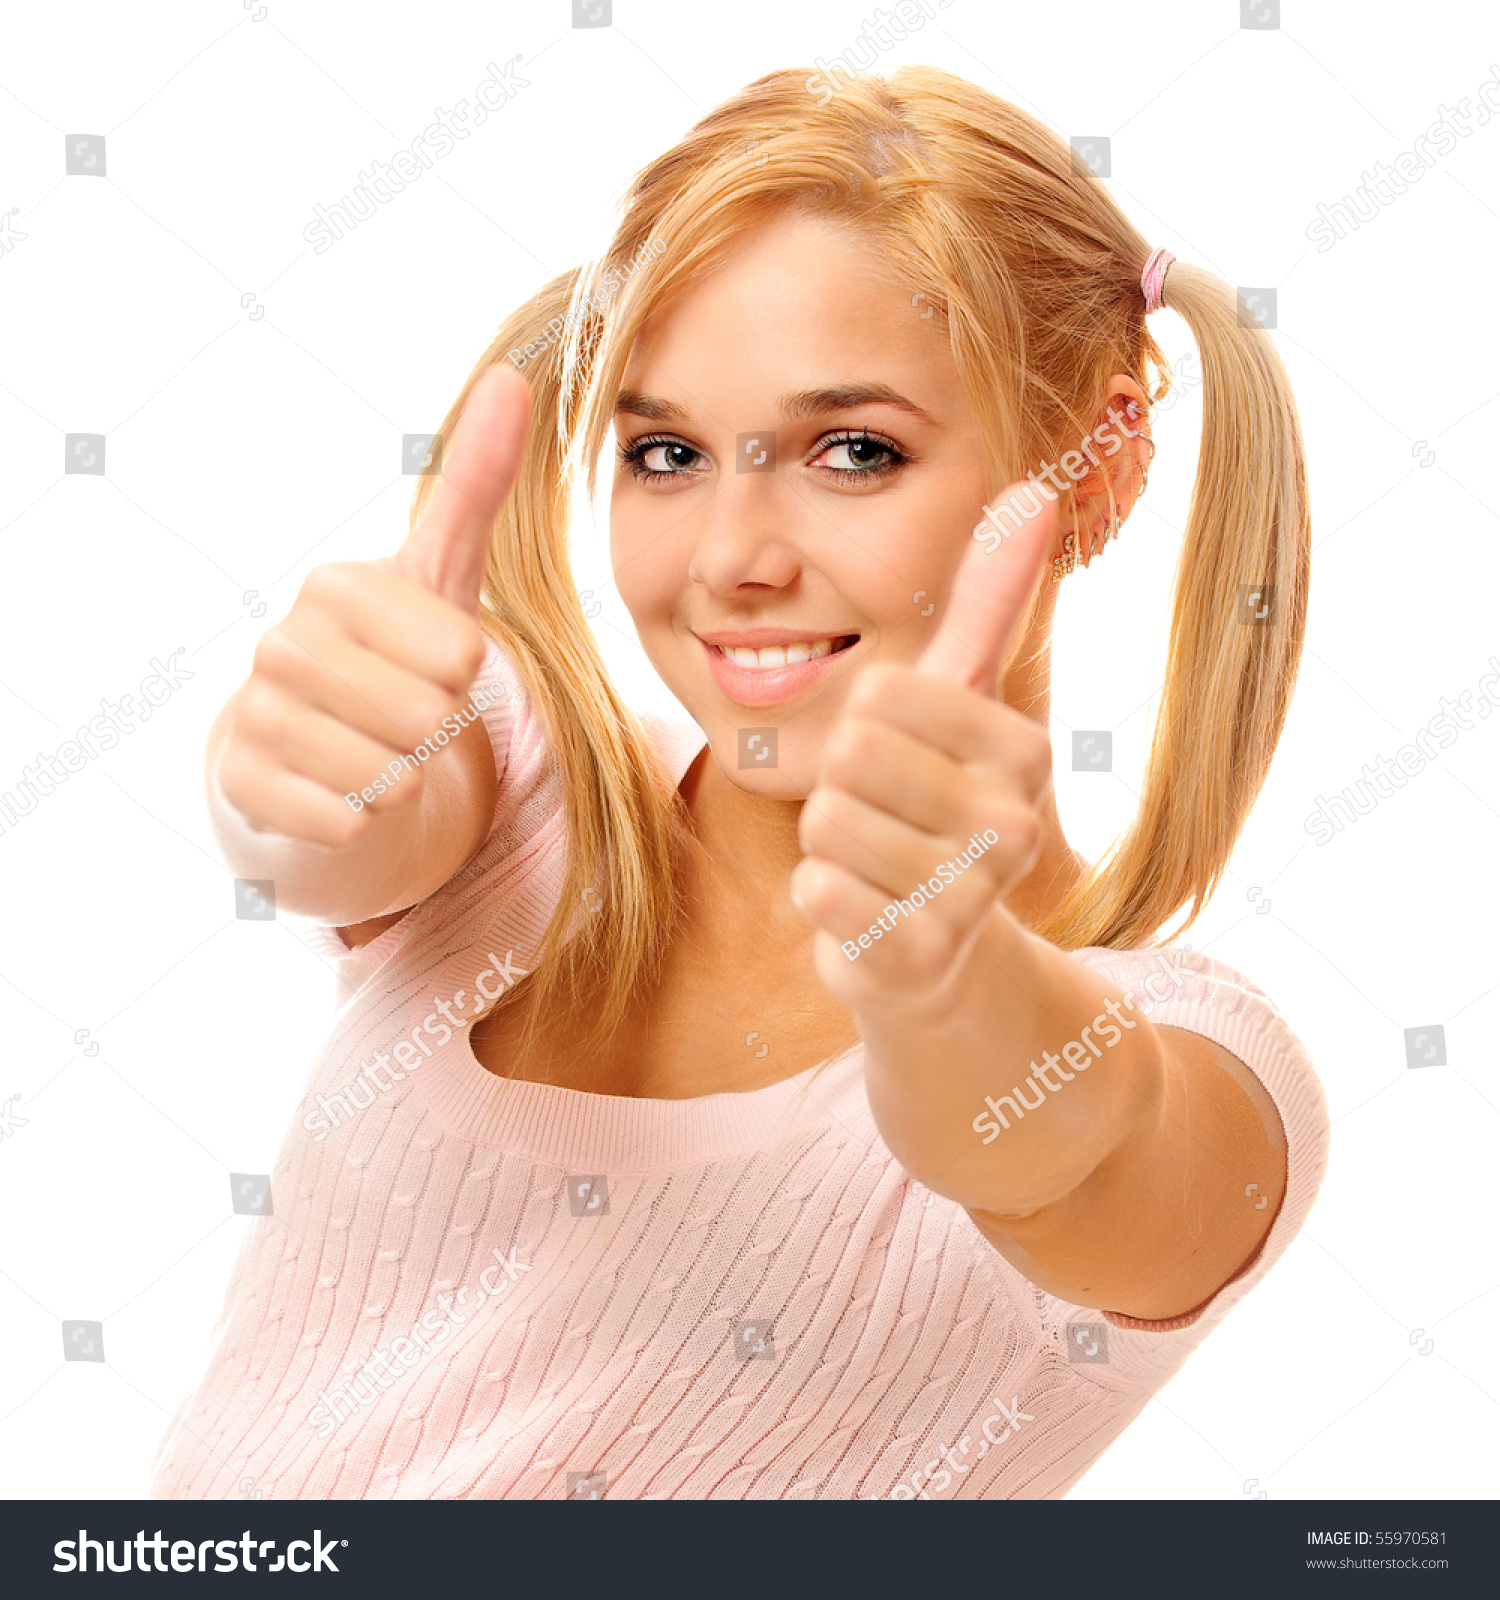 Blonde Has Lifted Big Fingers Hands Stock Photo Edit Now 55970581